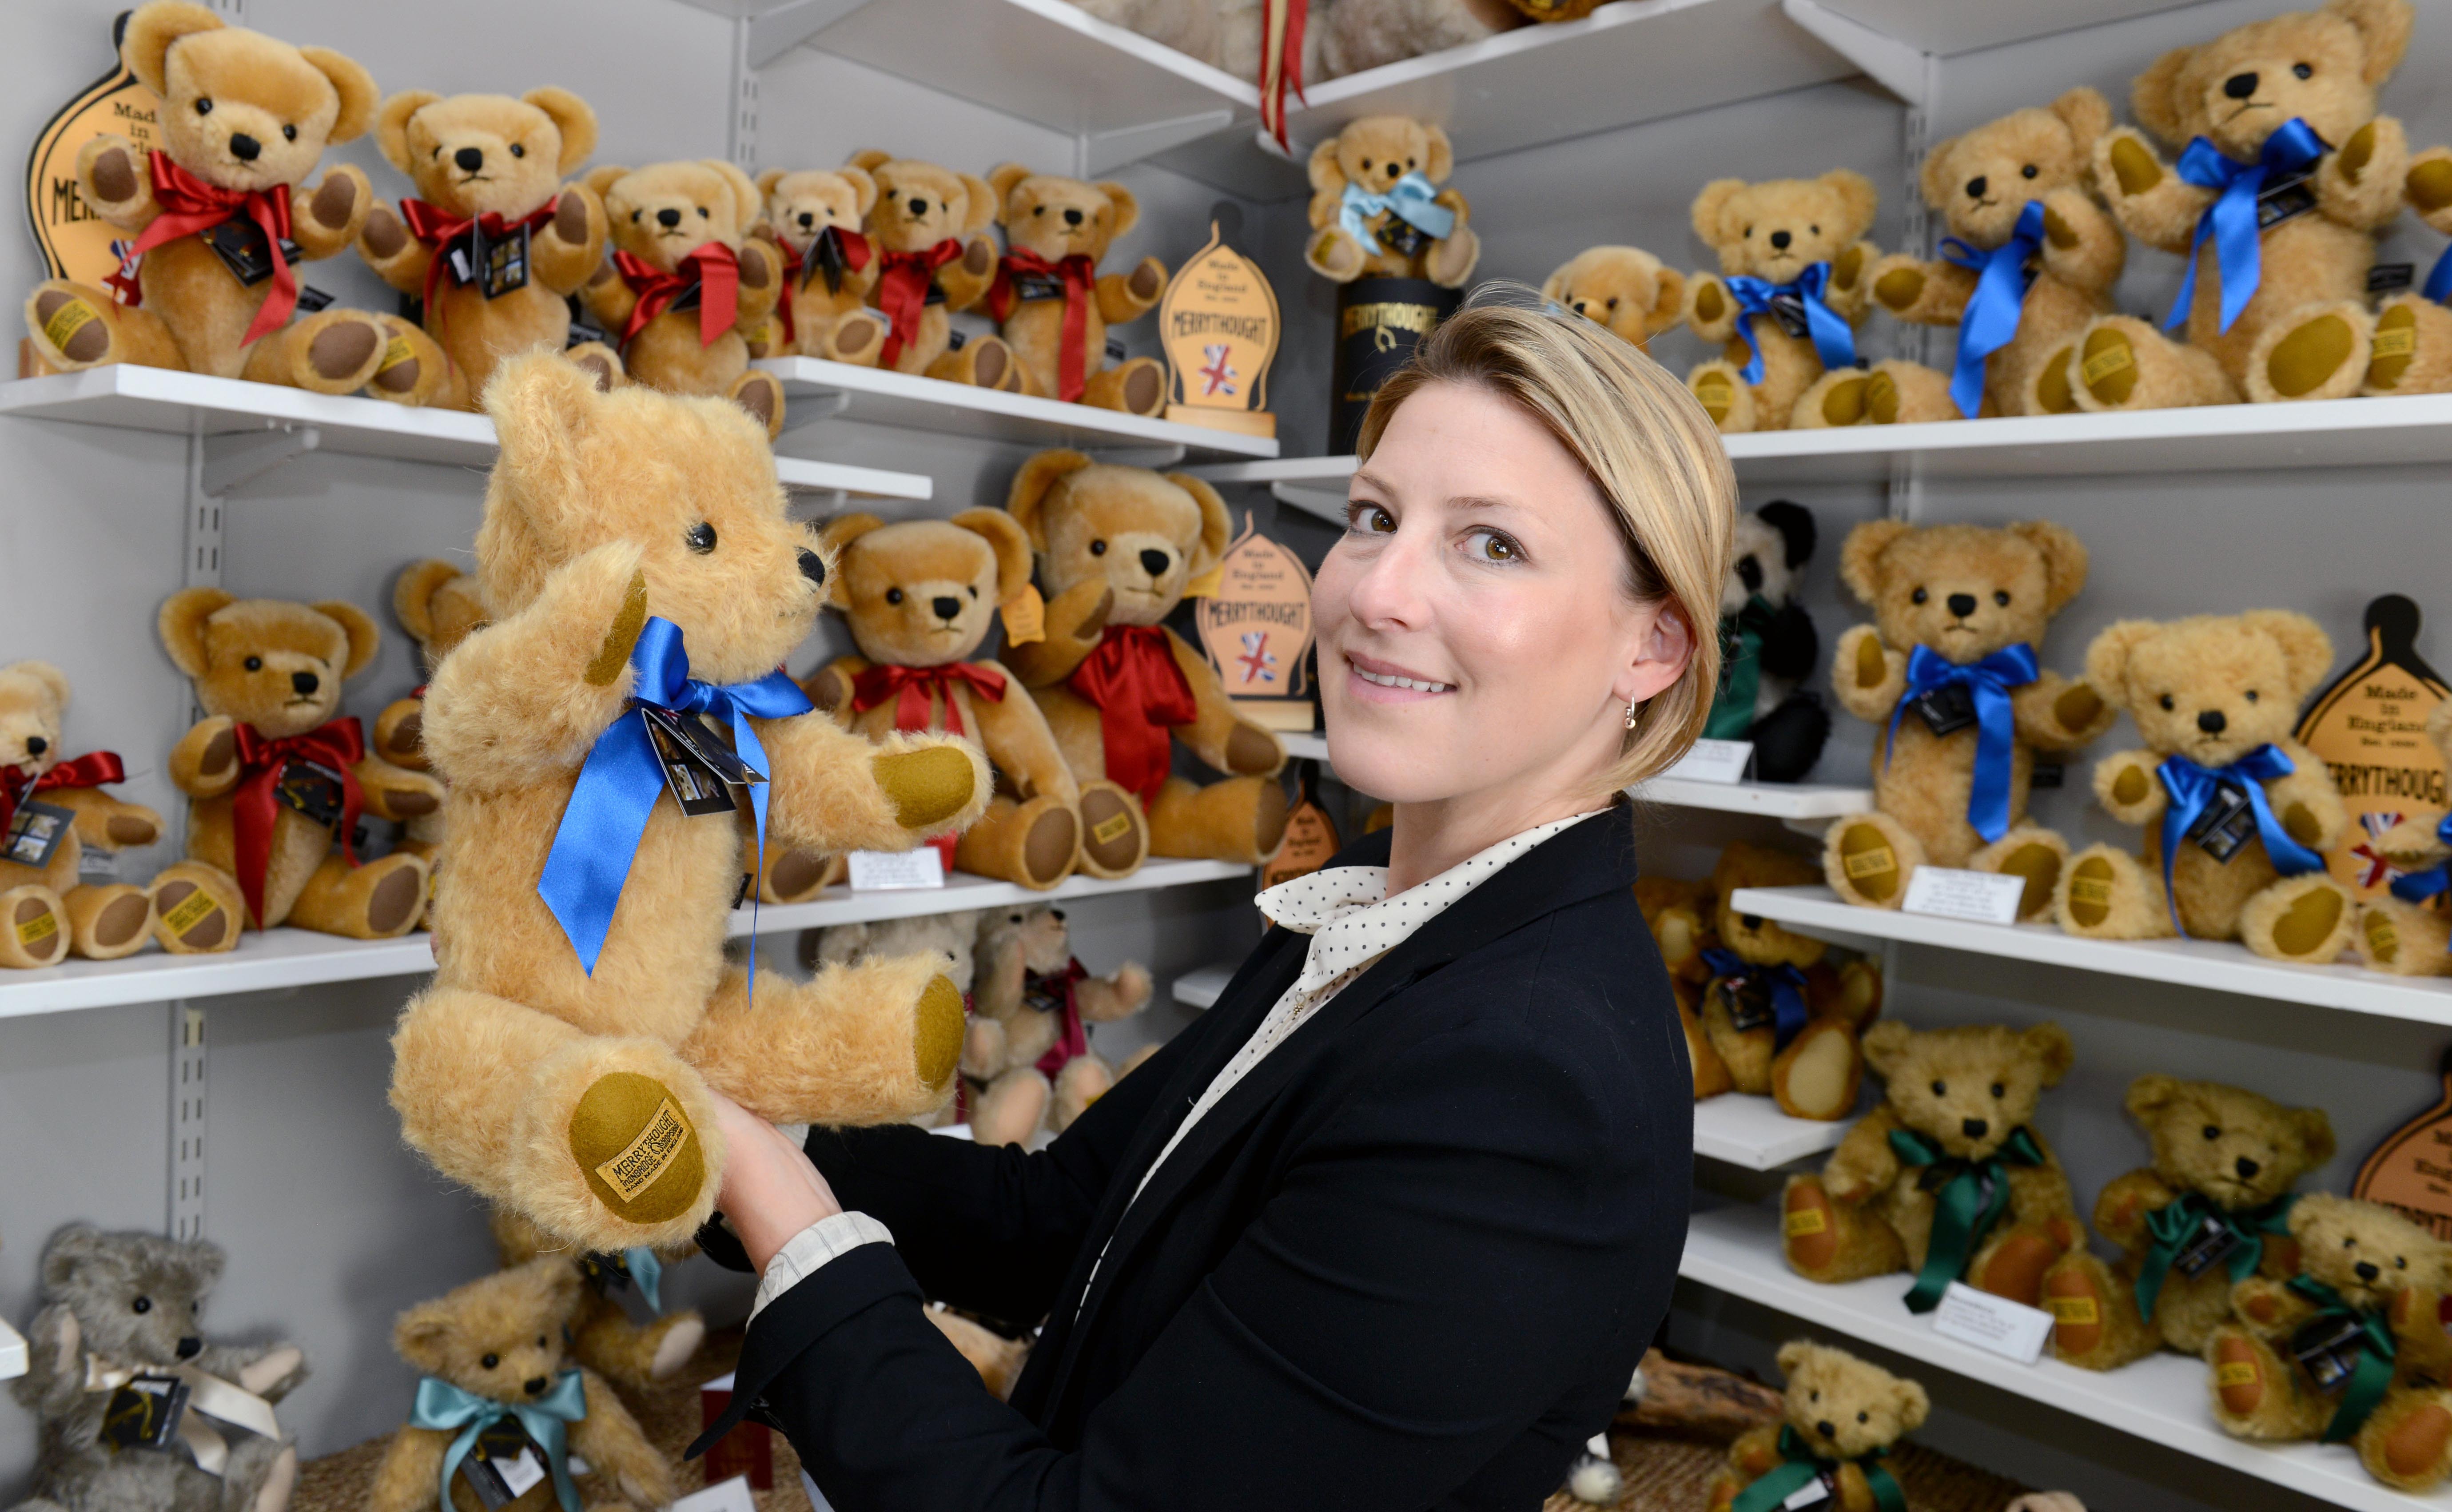 Teddy bears have been making history at Merrythought | Express & Star